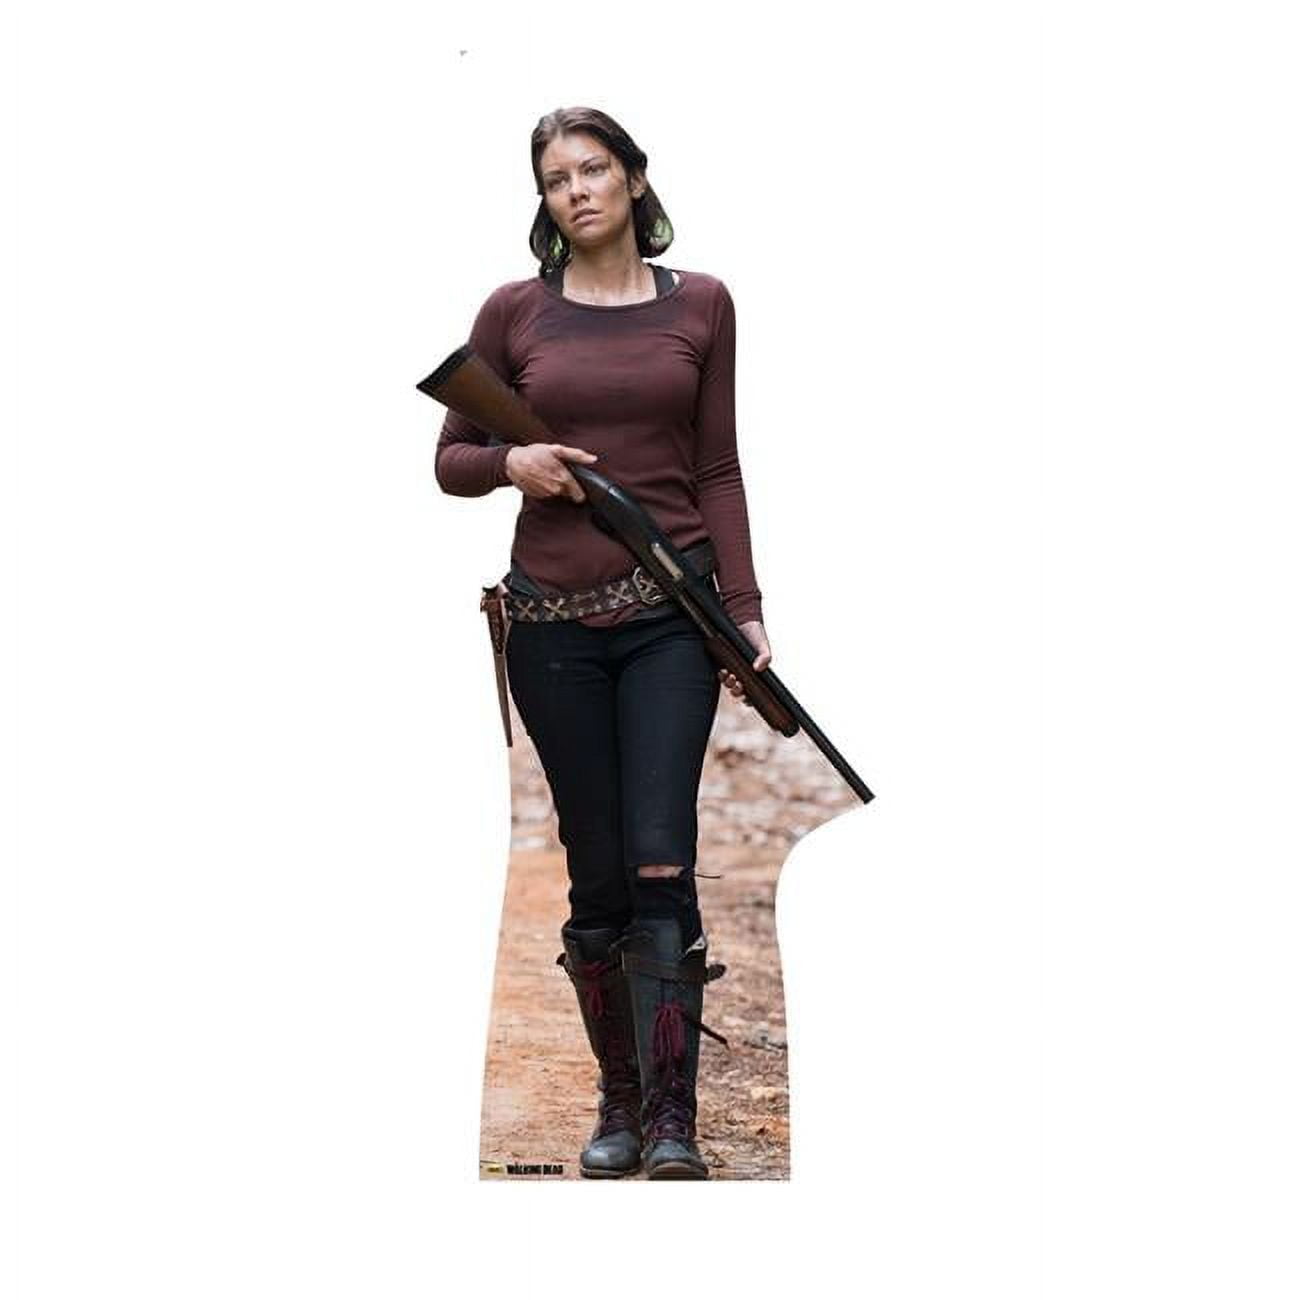 Picture of Advanced Graphics 2085 68 x 29 in. Maggie Greene - The Walking Dead Cardboard Standup